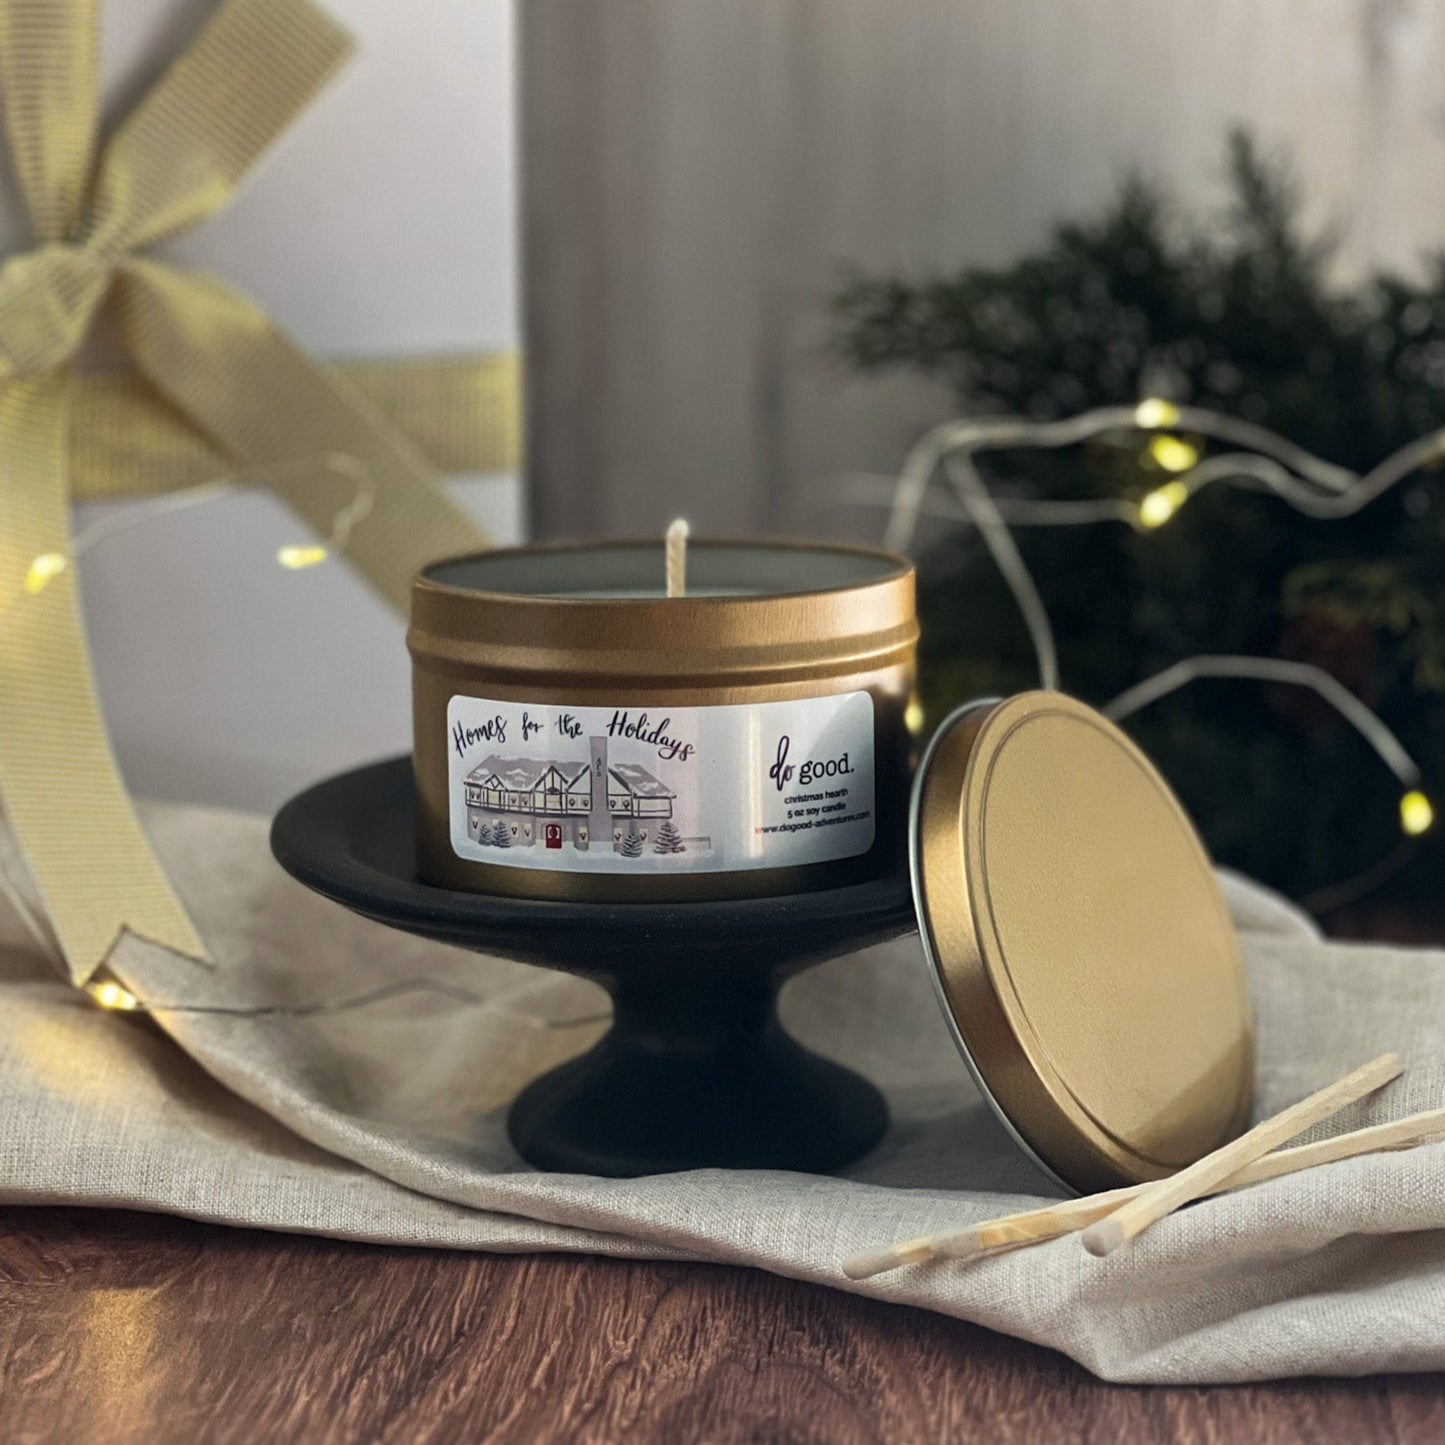 Homes for the Holidays (limited edition fundraising candle)